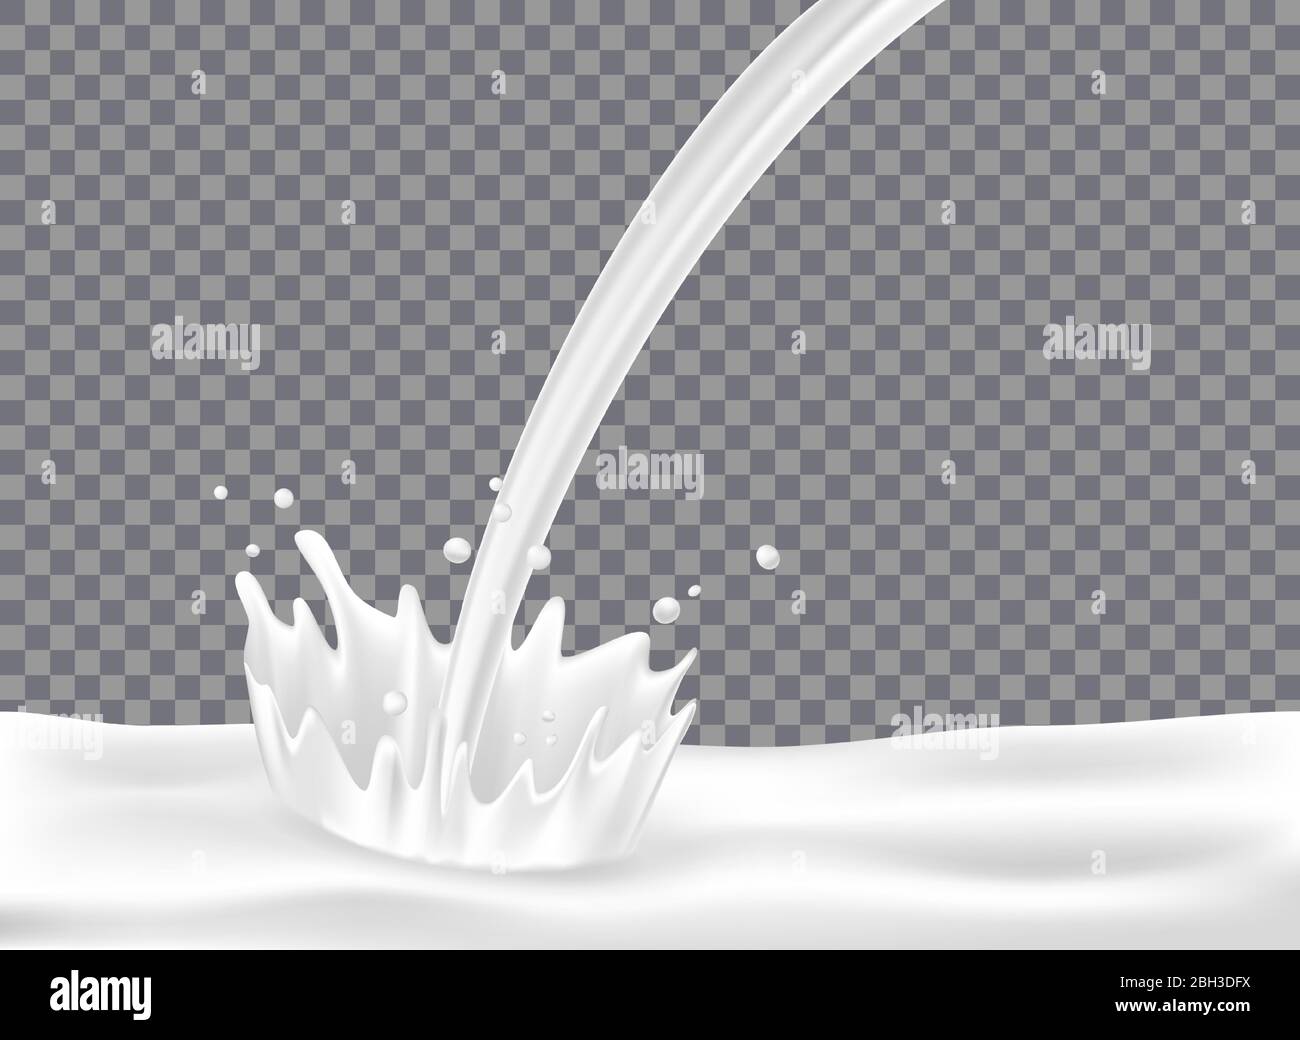 Milk with splash isolated on transparent background. White yogurt pouring down with realistic milk drop for package design. 3d Vector illustration Stock Vector